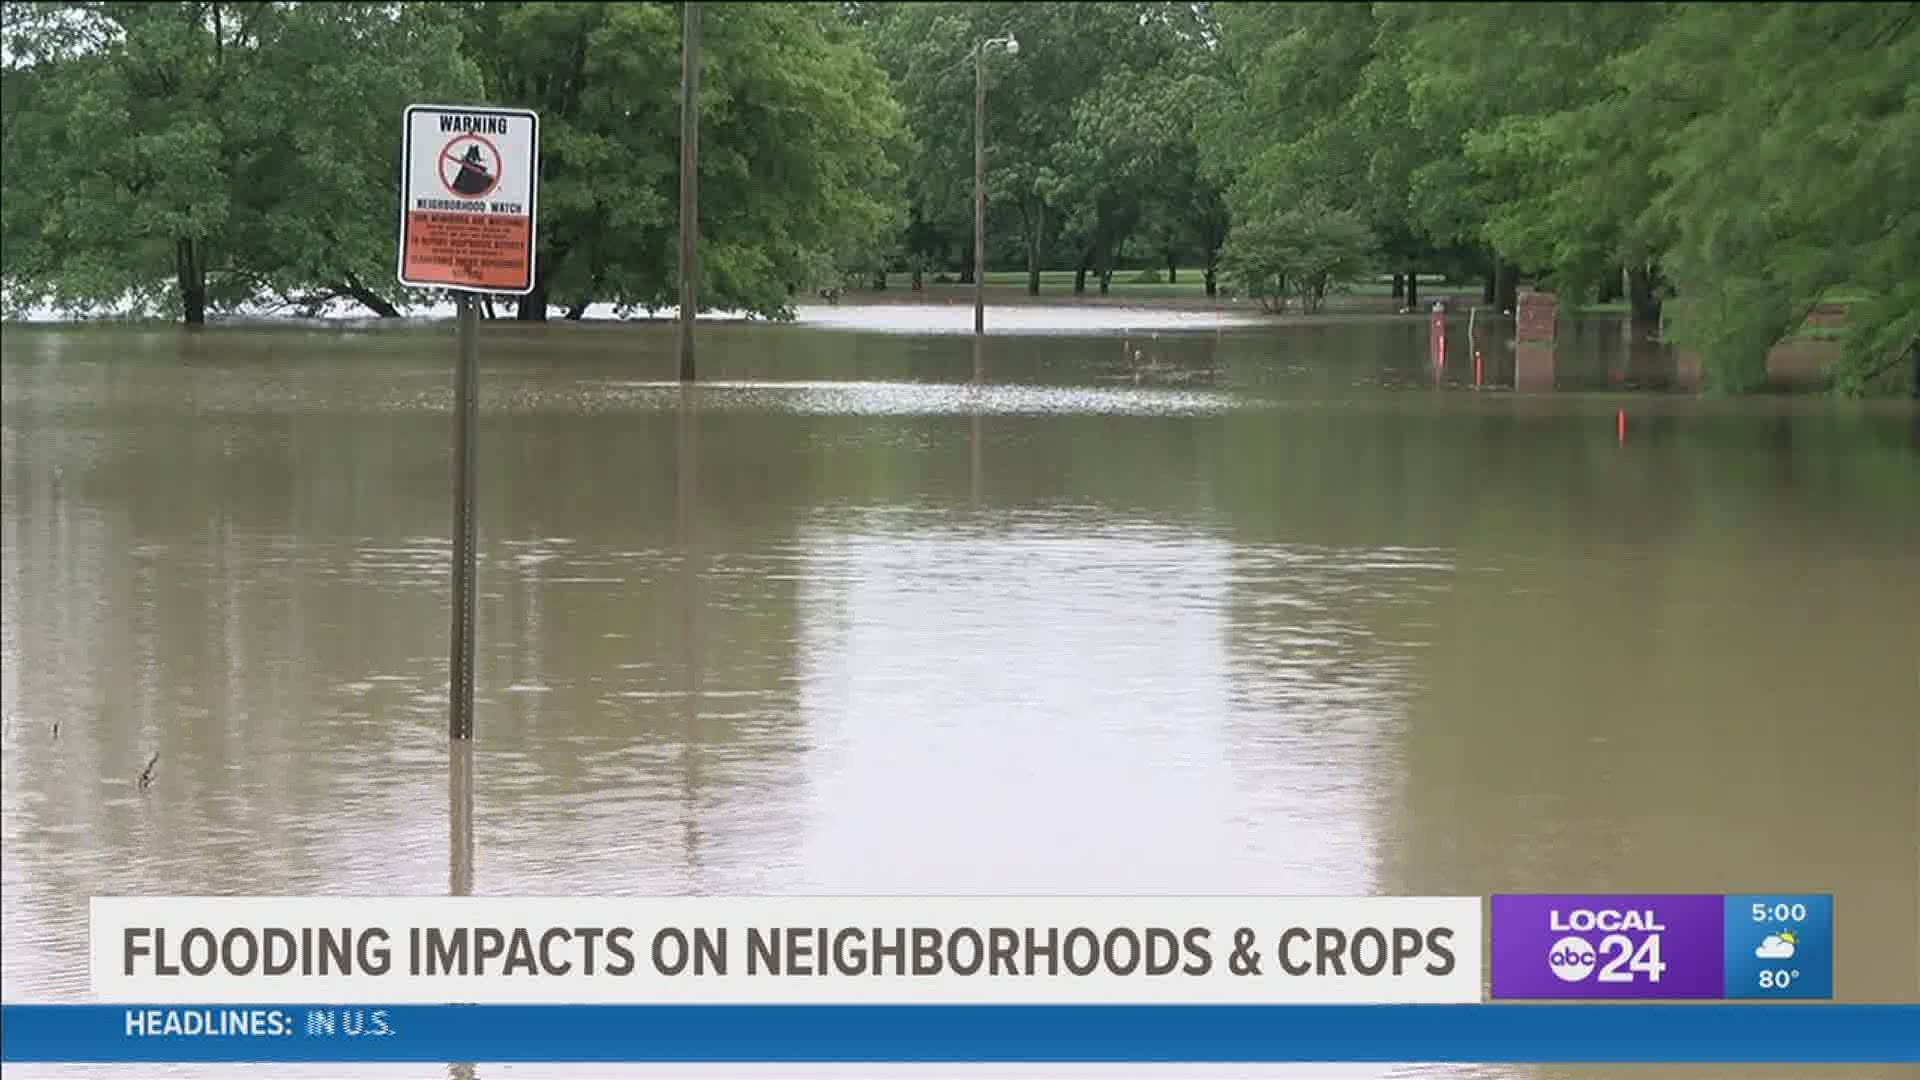 Coahoma County Extension fears heavy rainfall this week could ruin crops on tens of thousands of acres in the area and across the Mississippi Delta.